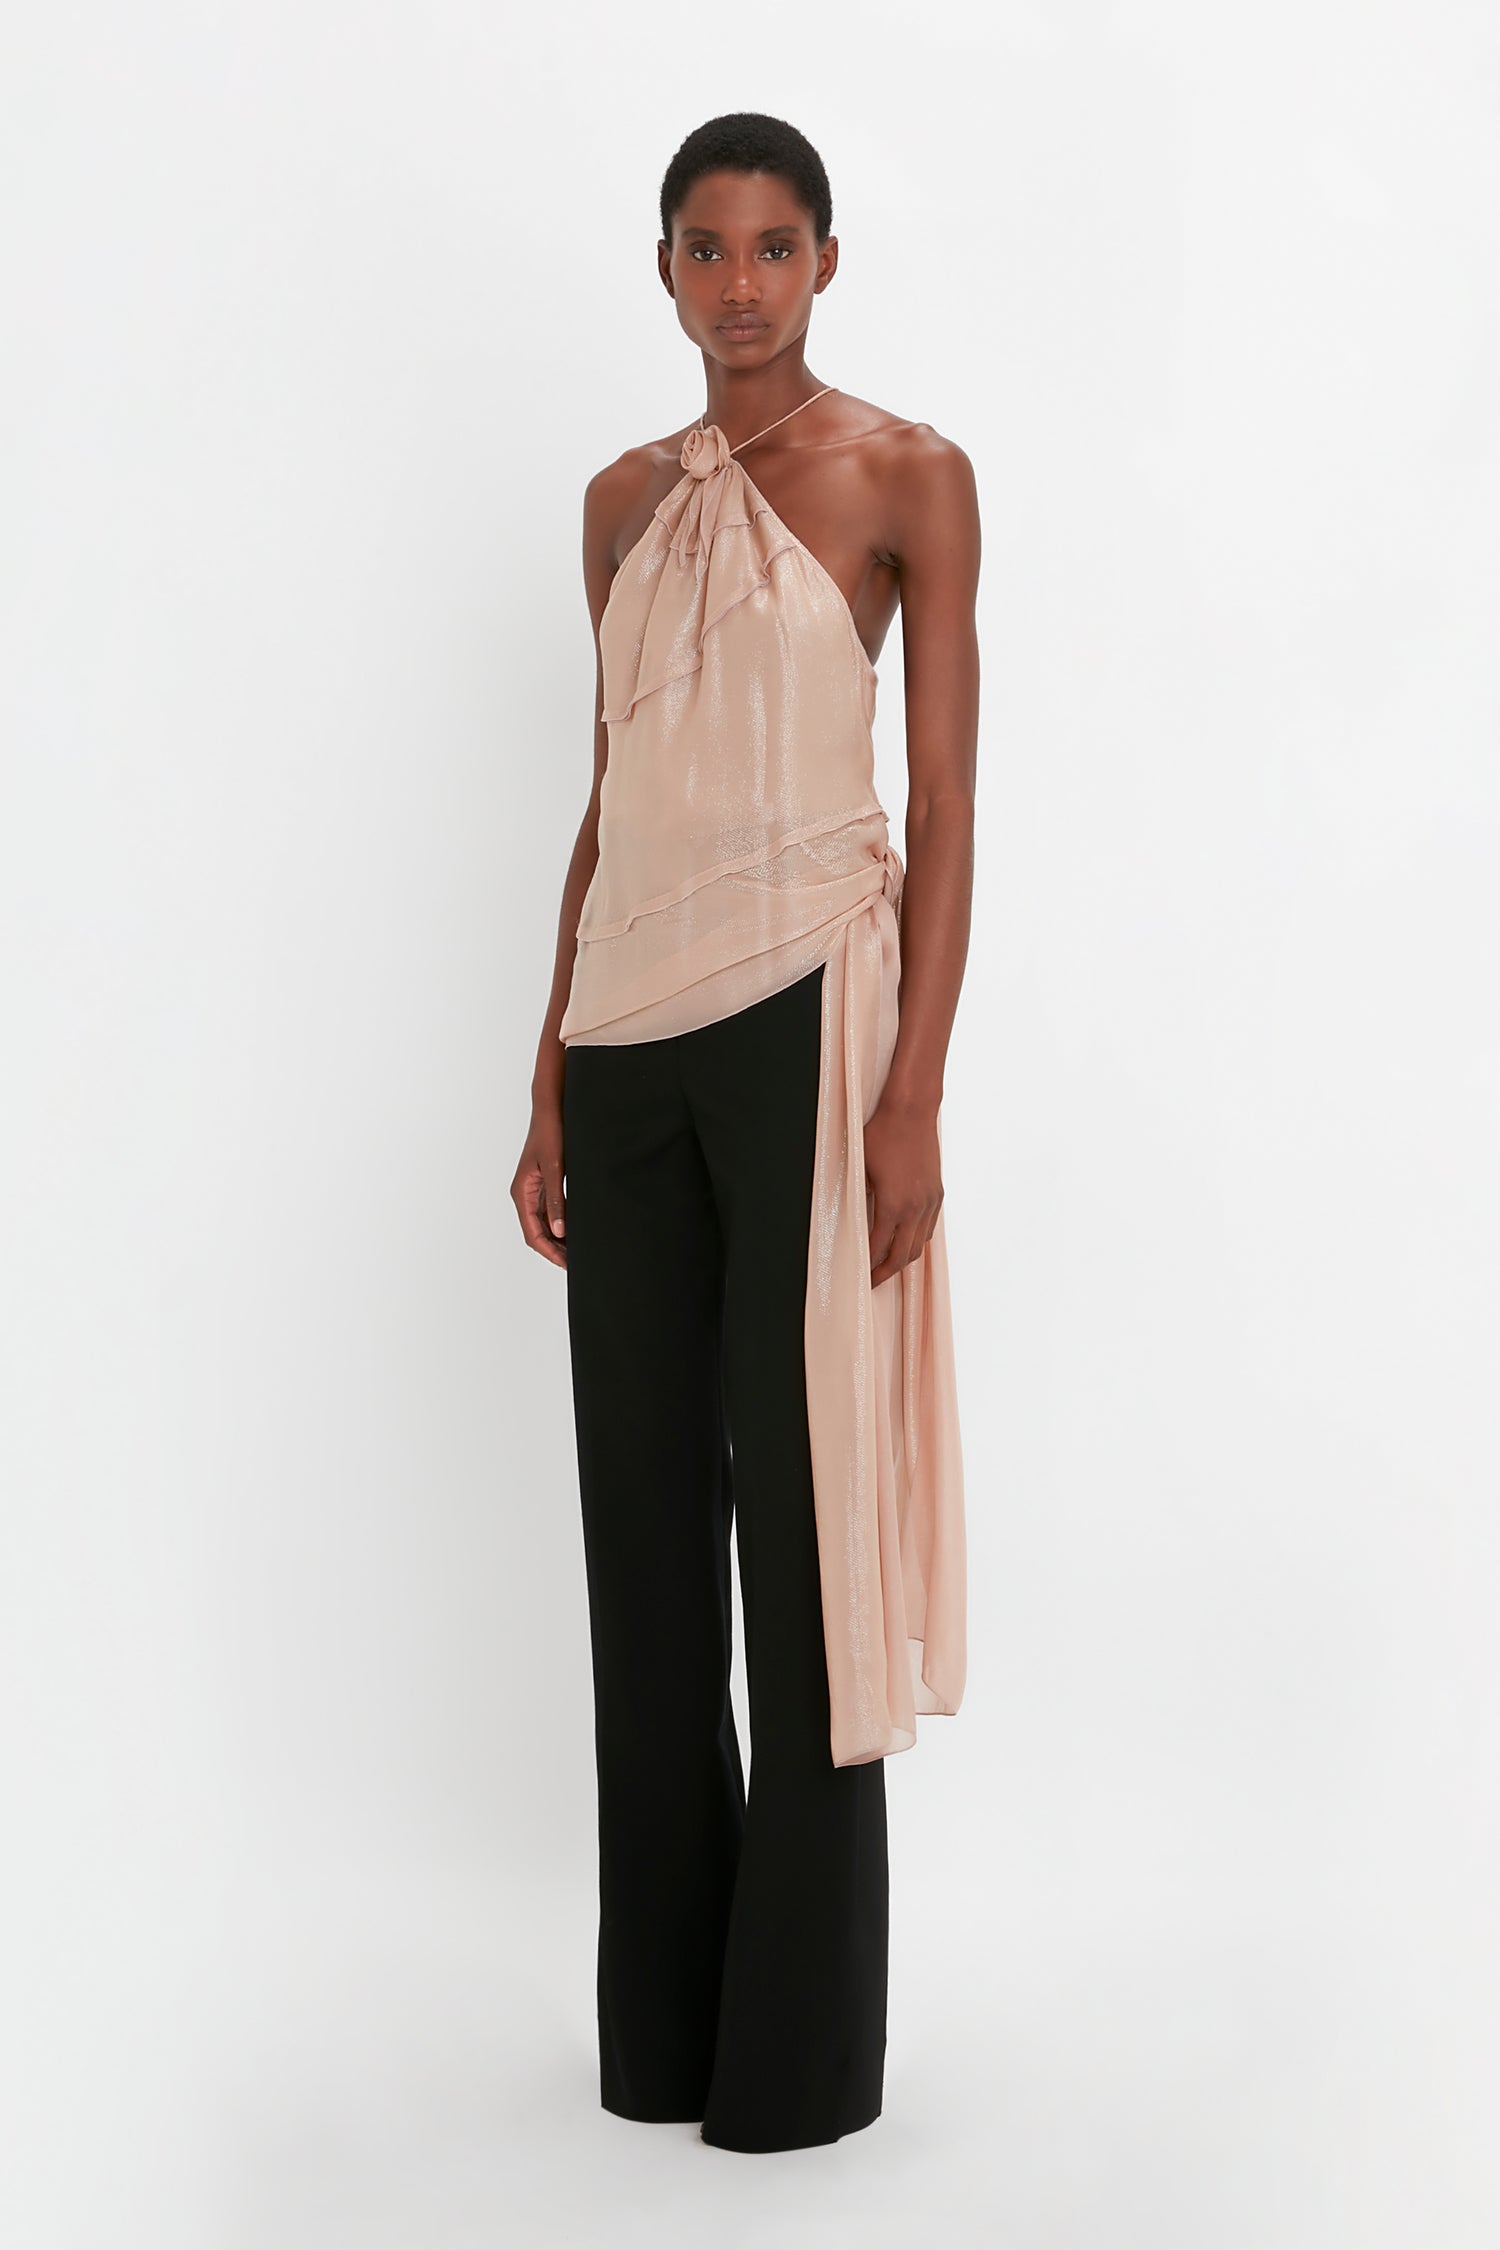 A person in a beige Flower Detail Cami Top In Rosewater by Victoria Beckham, paired with black Satin Panel Straight Leg Trousers, stands against a plain white background.